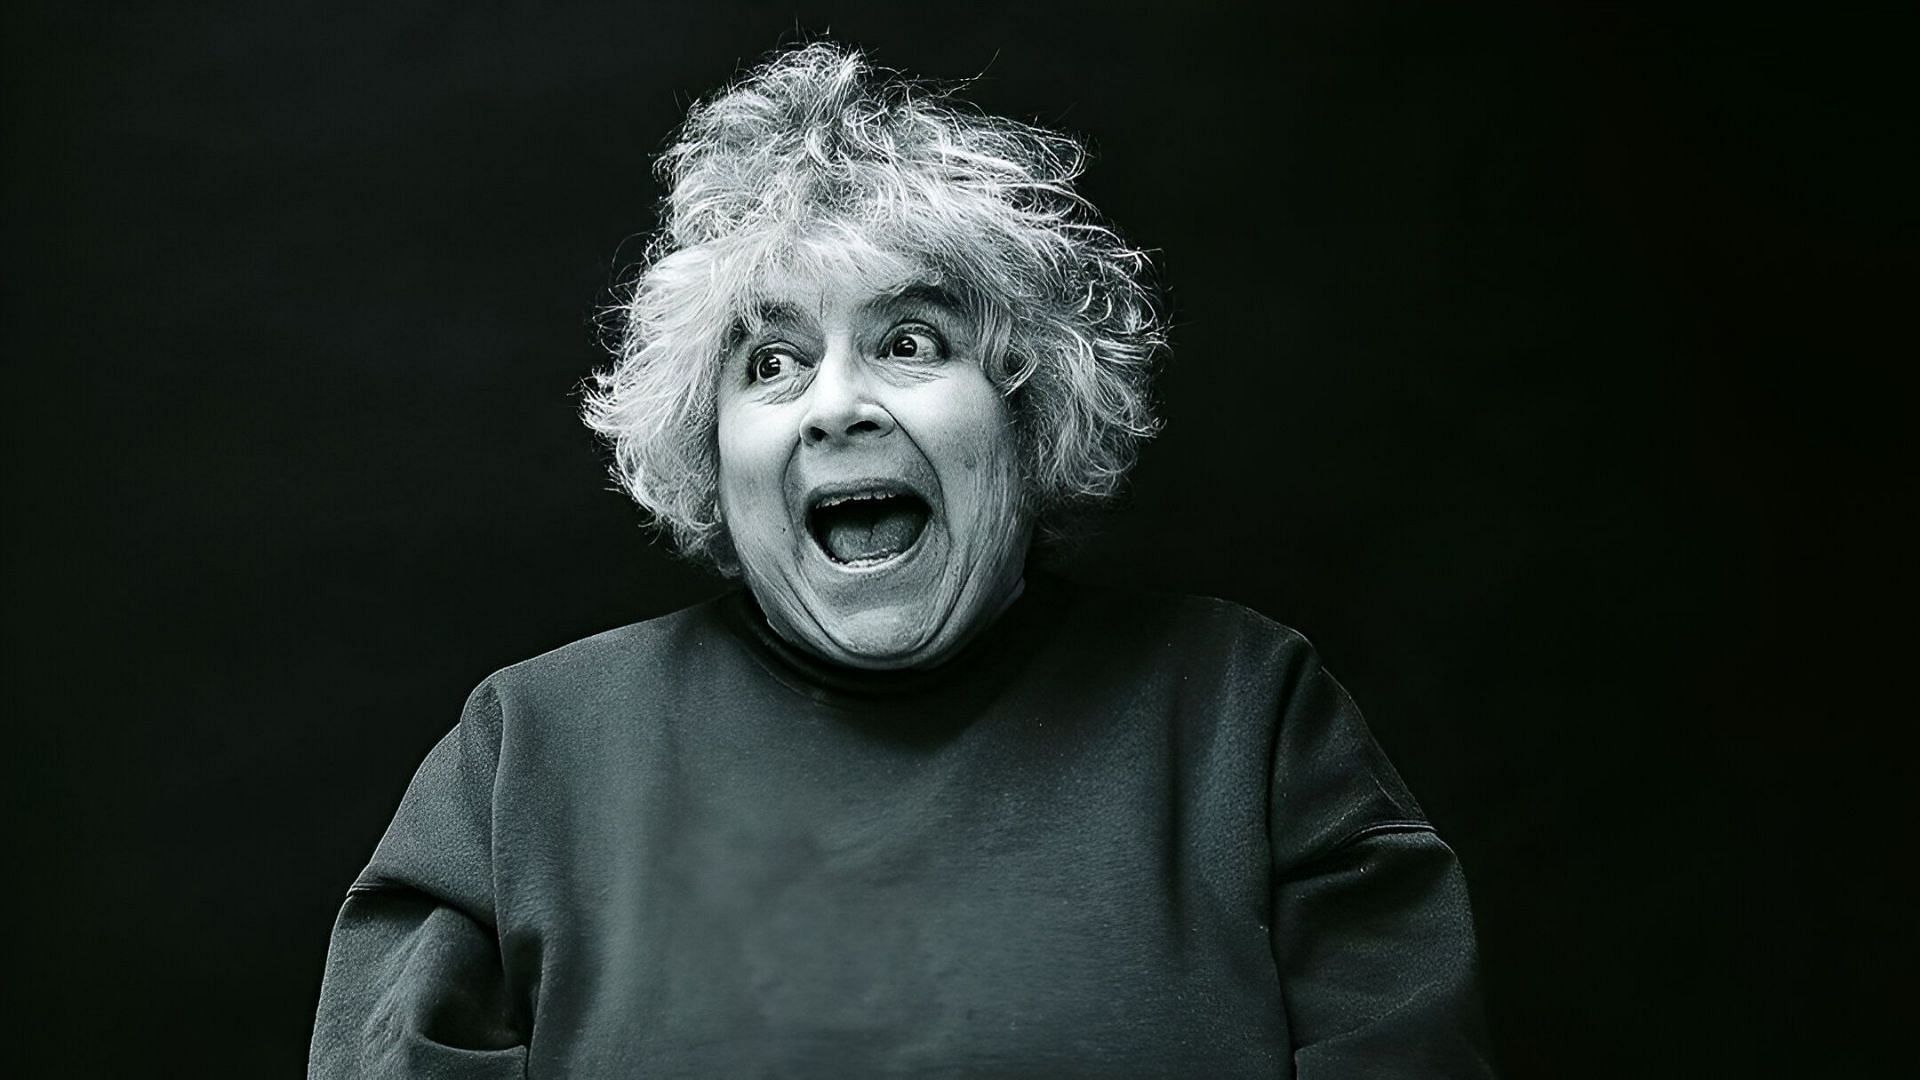 Miriam Margoyles won the BAFTA Award for Best Actress in a Supporting Role as Mrs Mingott in Martin Scorsese